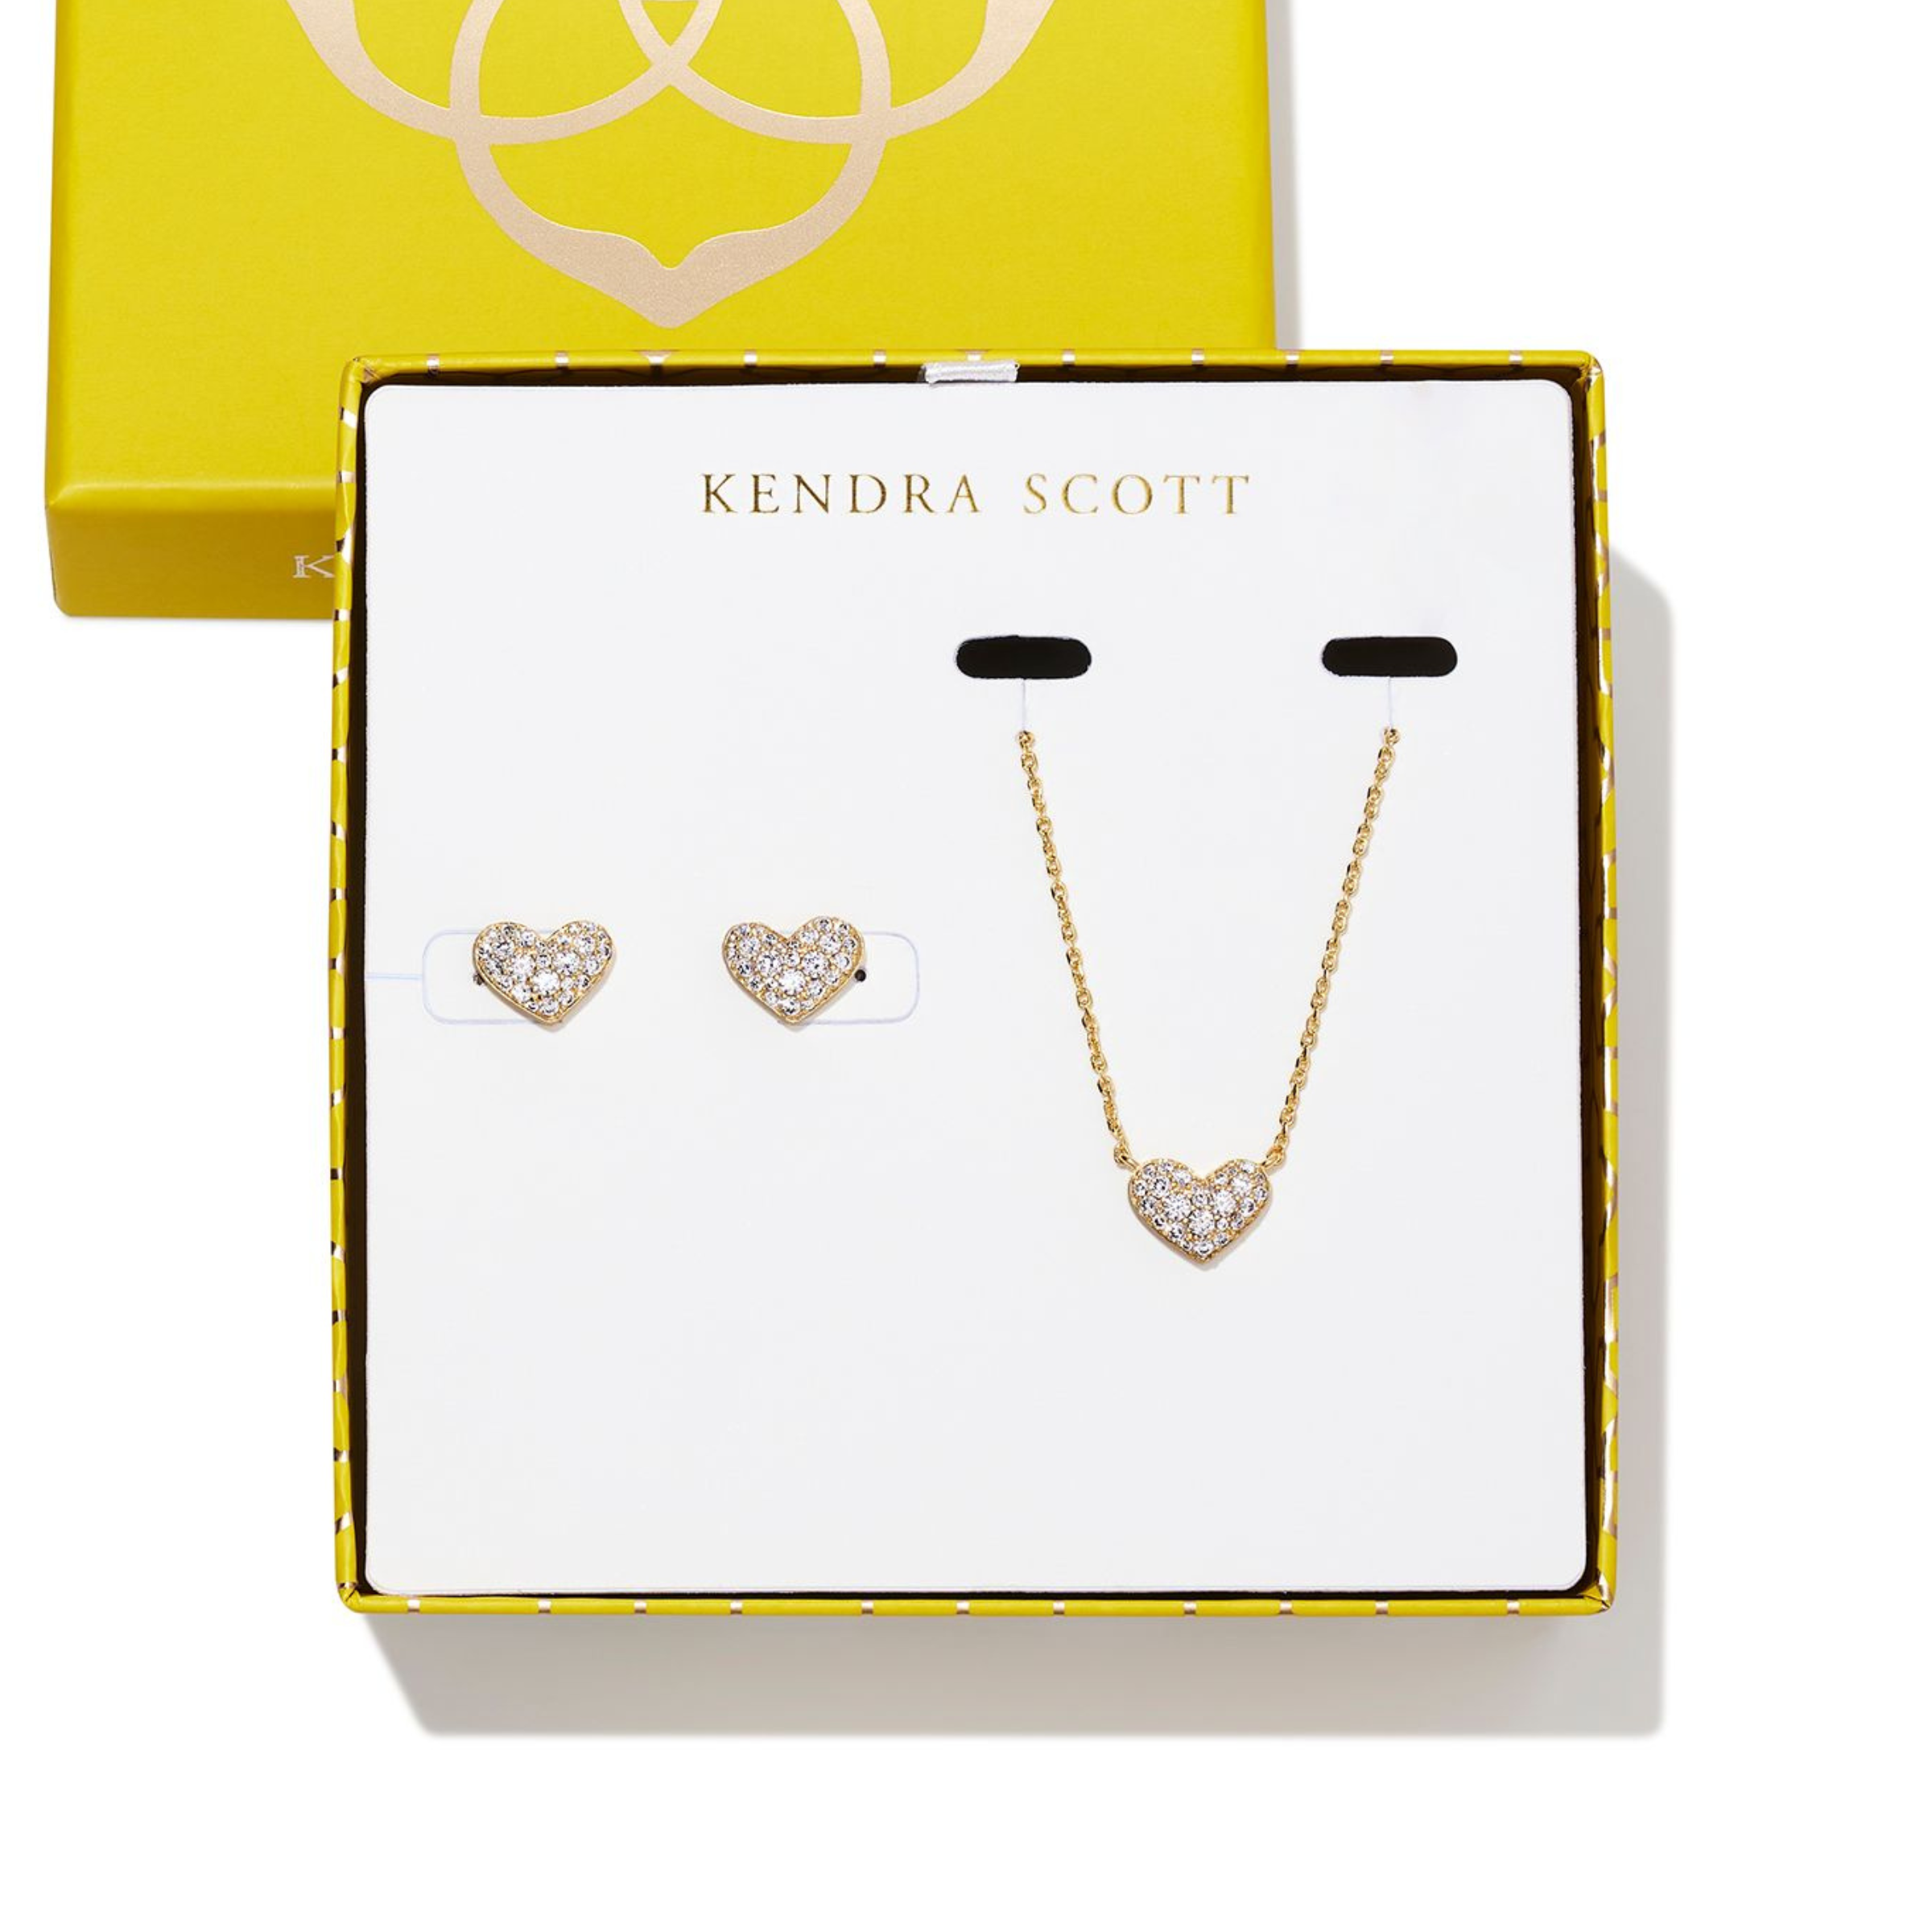 Gold necklace with heart pendnant and gold heart earrings pictured on a Kendra Scott box. The hearts are encrusted with clear crystals.